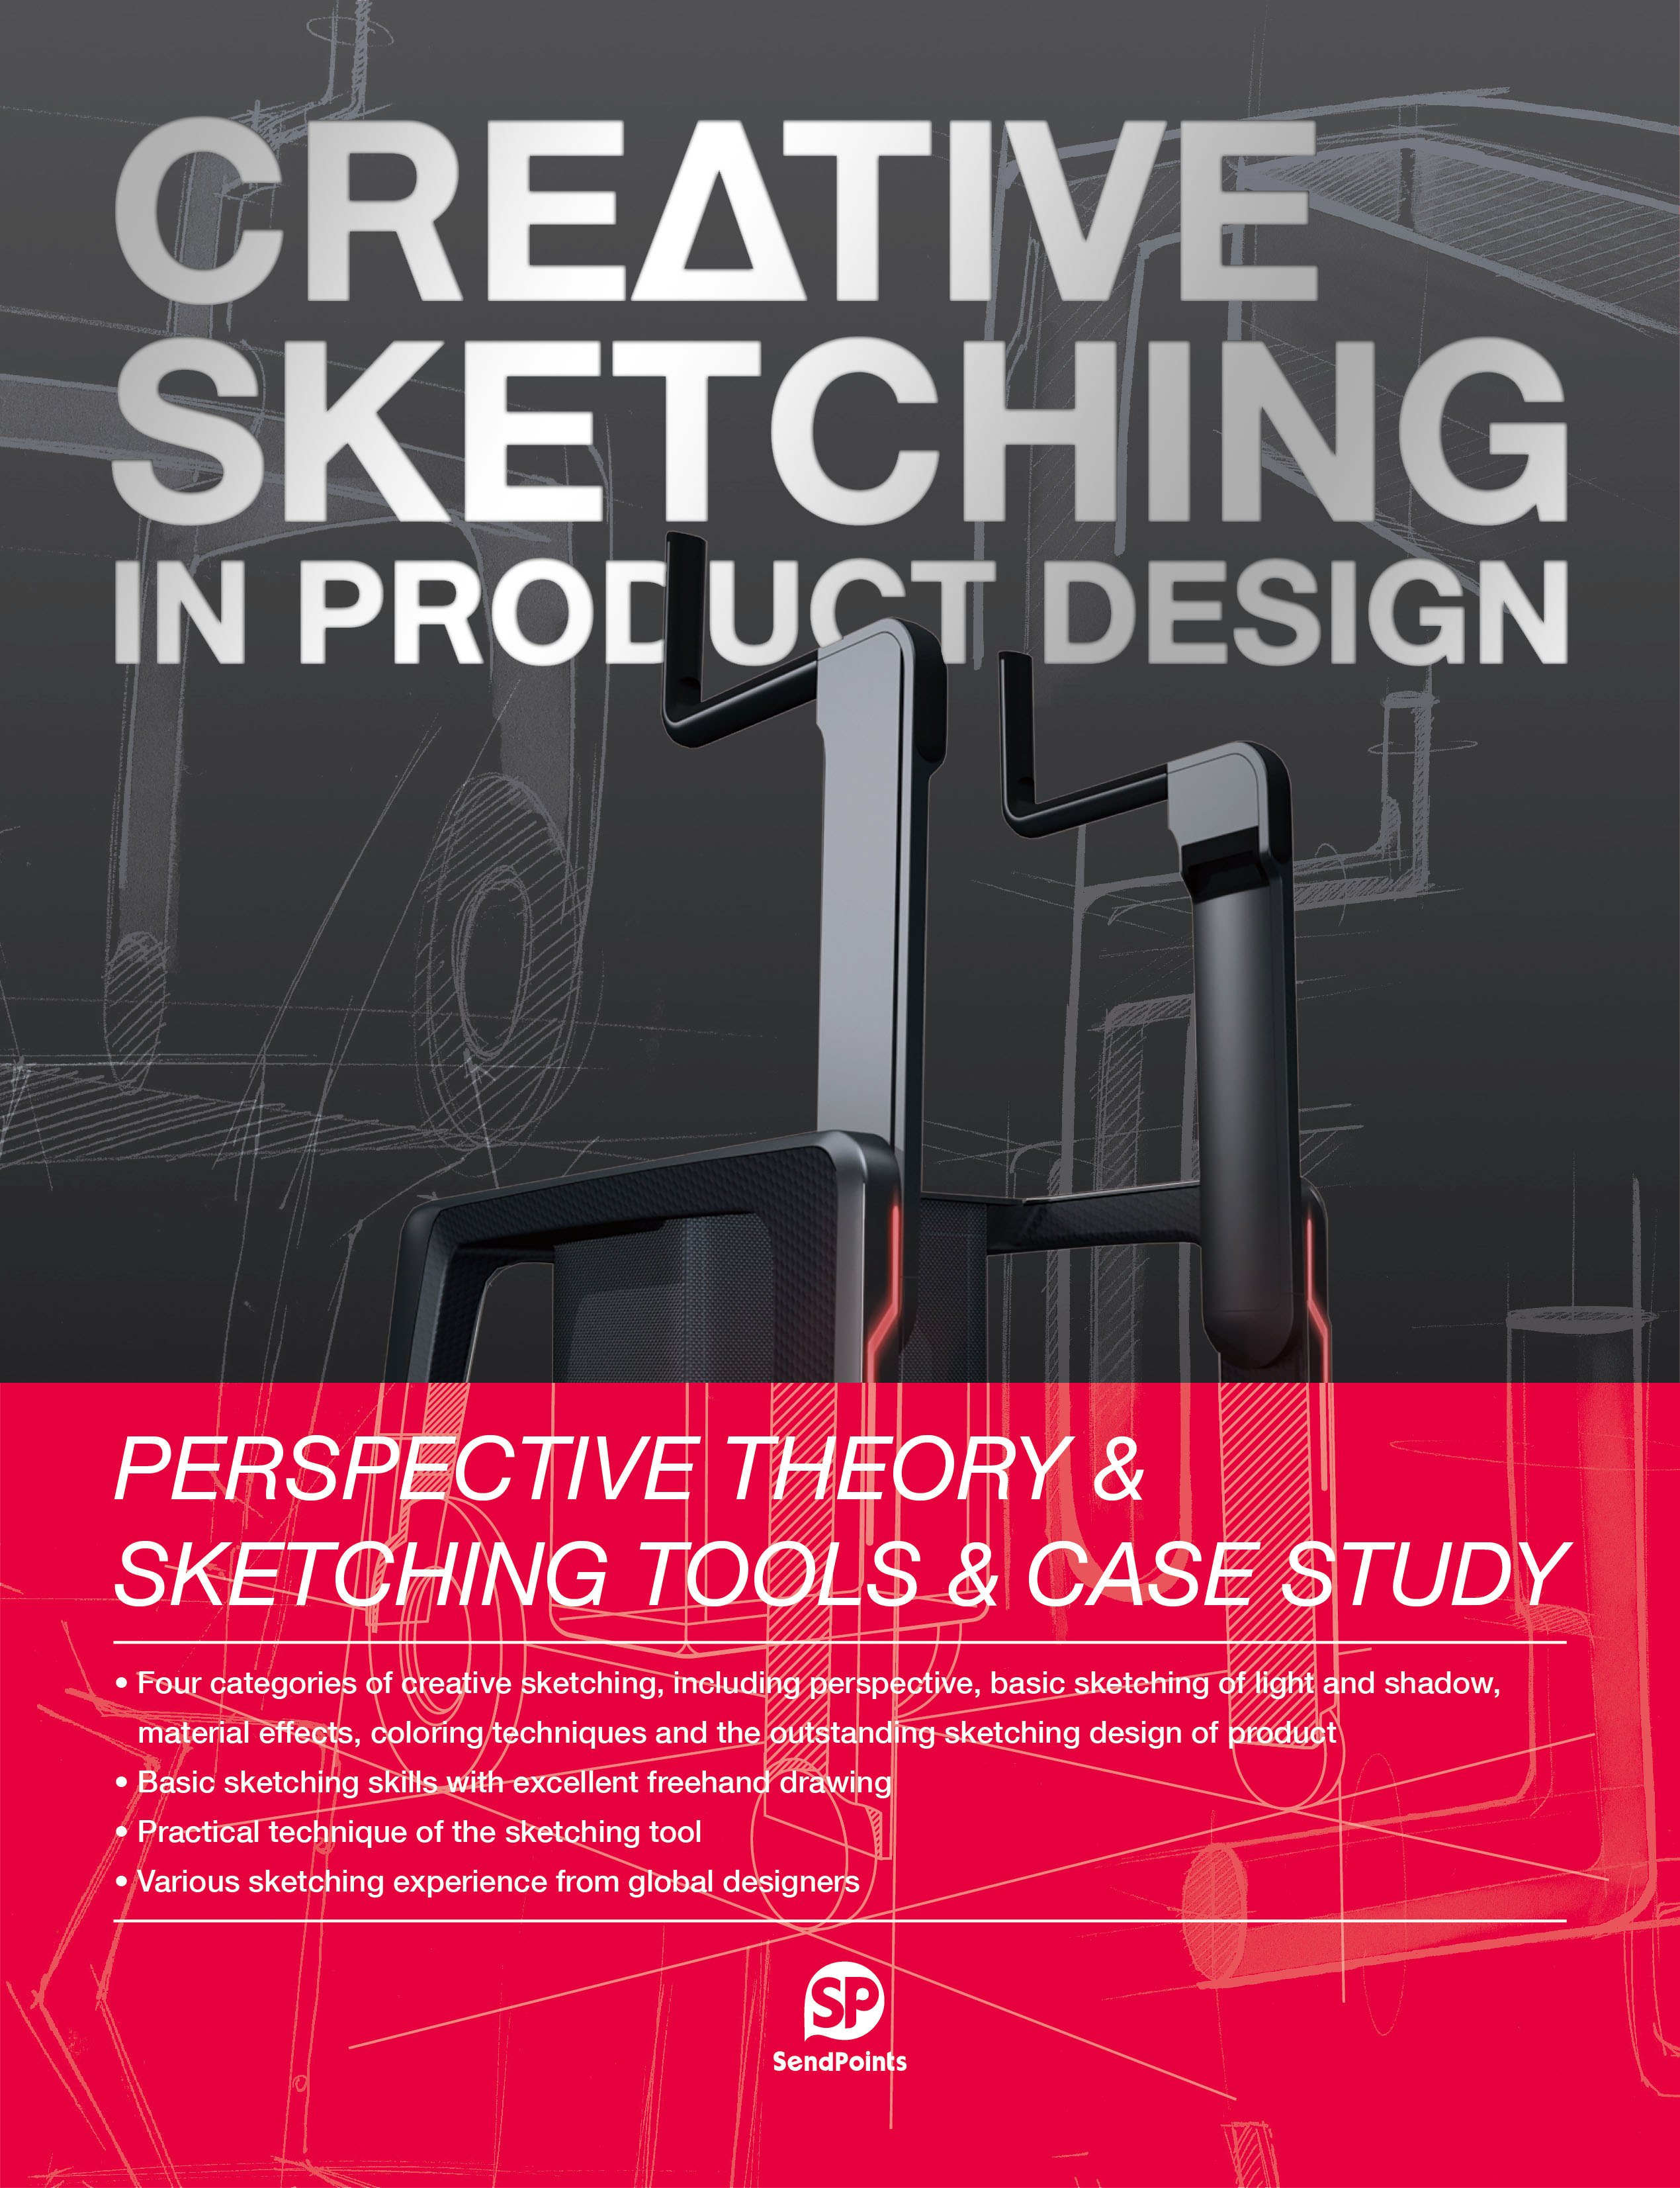 CREATIVE SKETCHING IN PRODUCT DESIGN